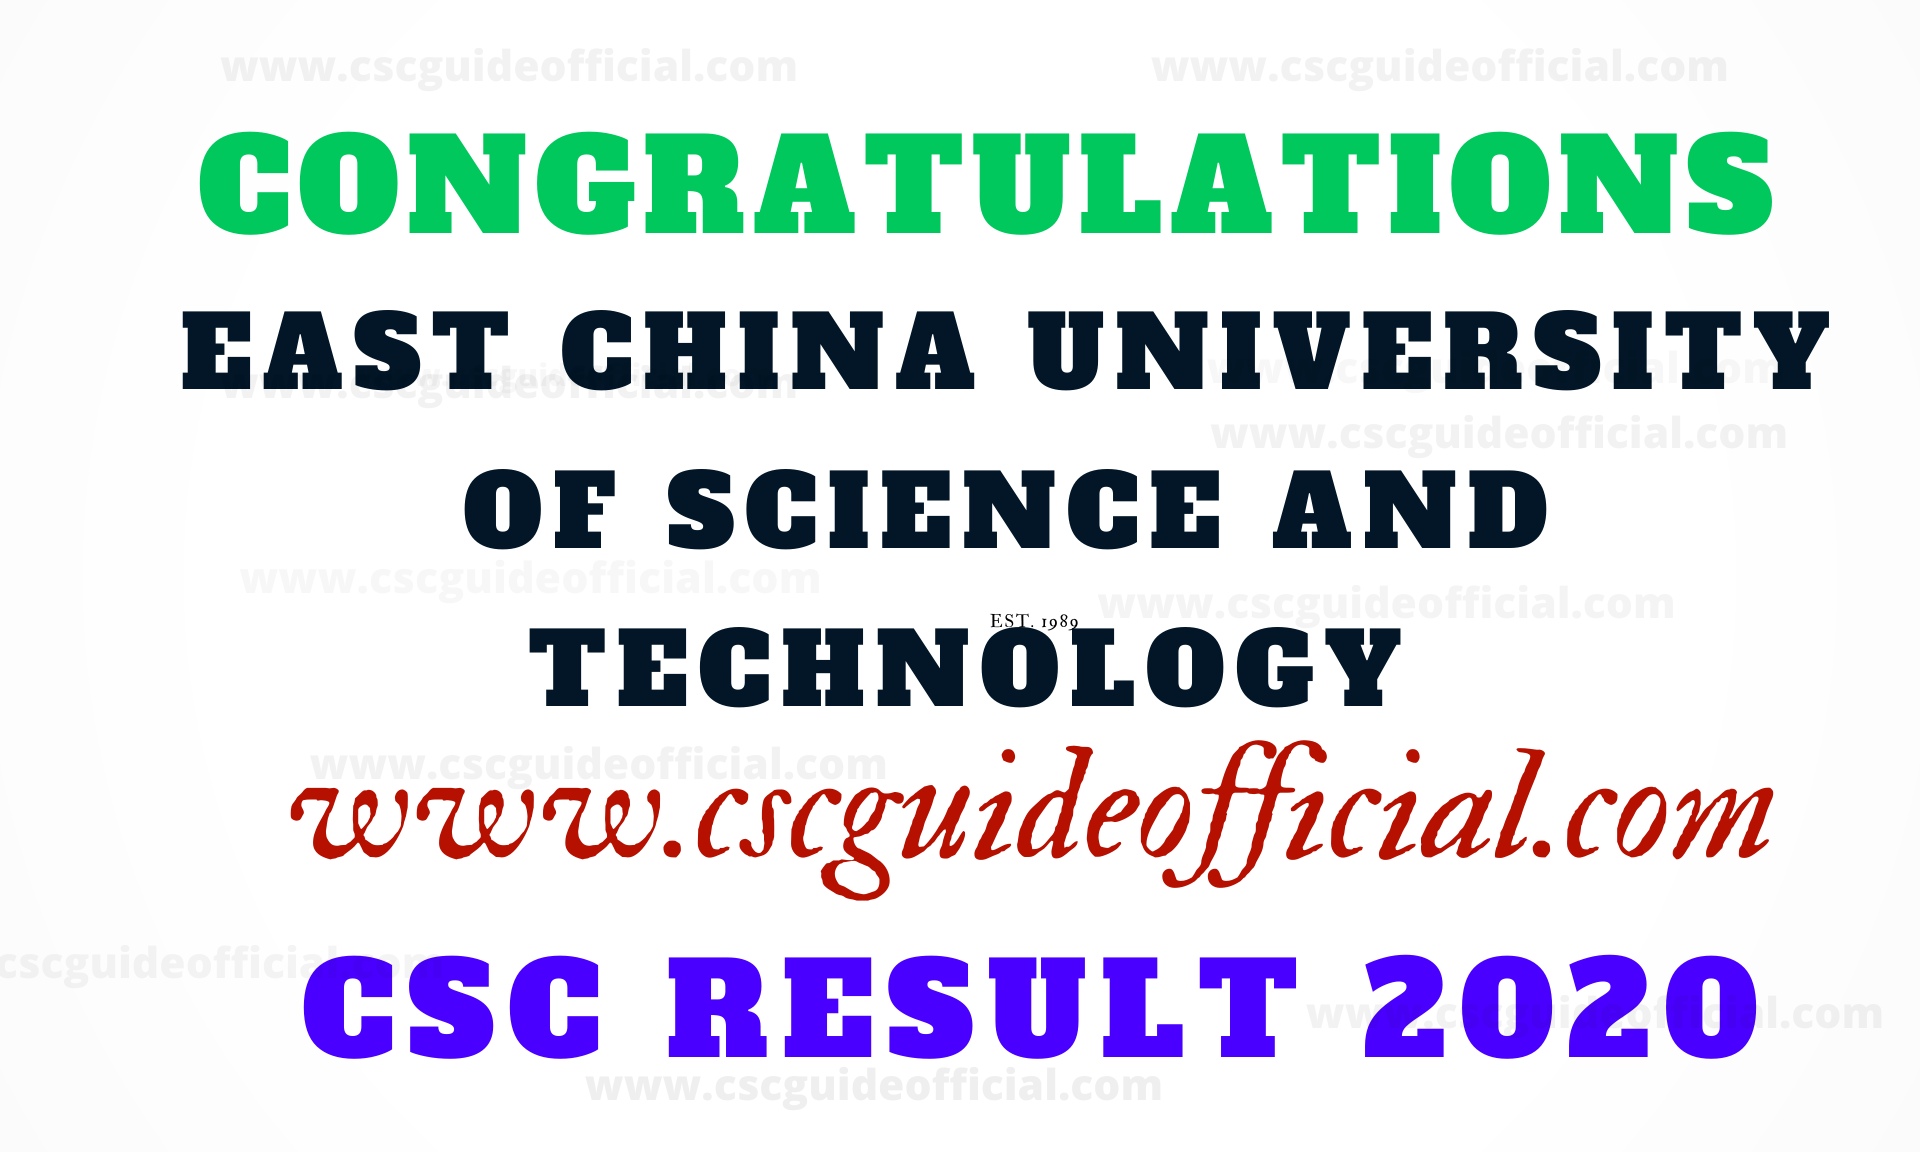 east china university of science and technology csc result 2020